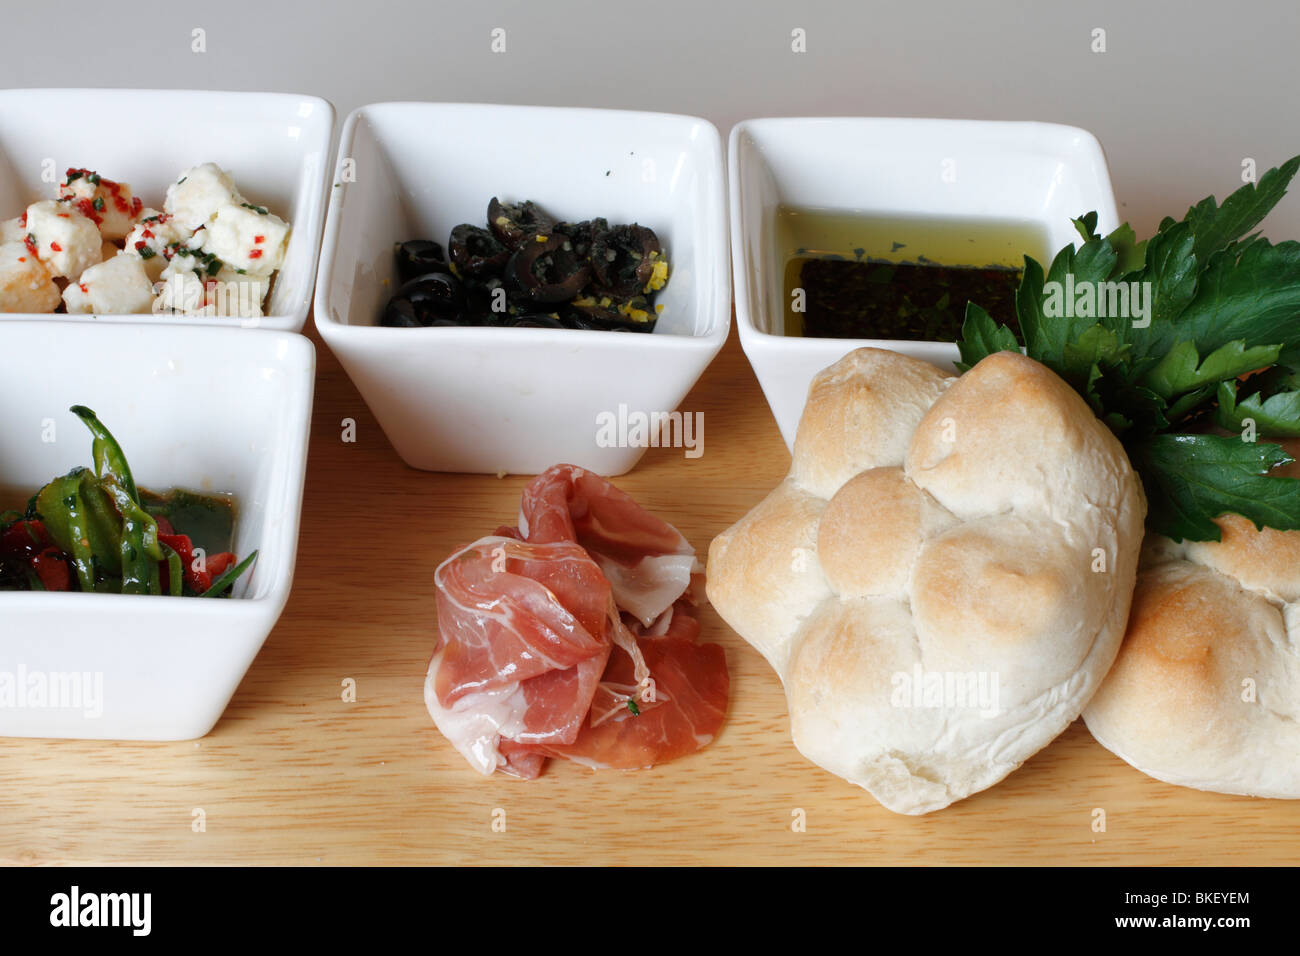 Mixed starter, feta (sheep) cheese, Olives in oil, olive oil dip, mixed shredded peppers, parma ham crusty bread rolls Wedding breakfast table Rufford wedding facilities, Rufford Mill Stock Photo